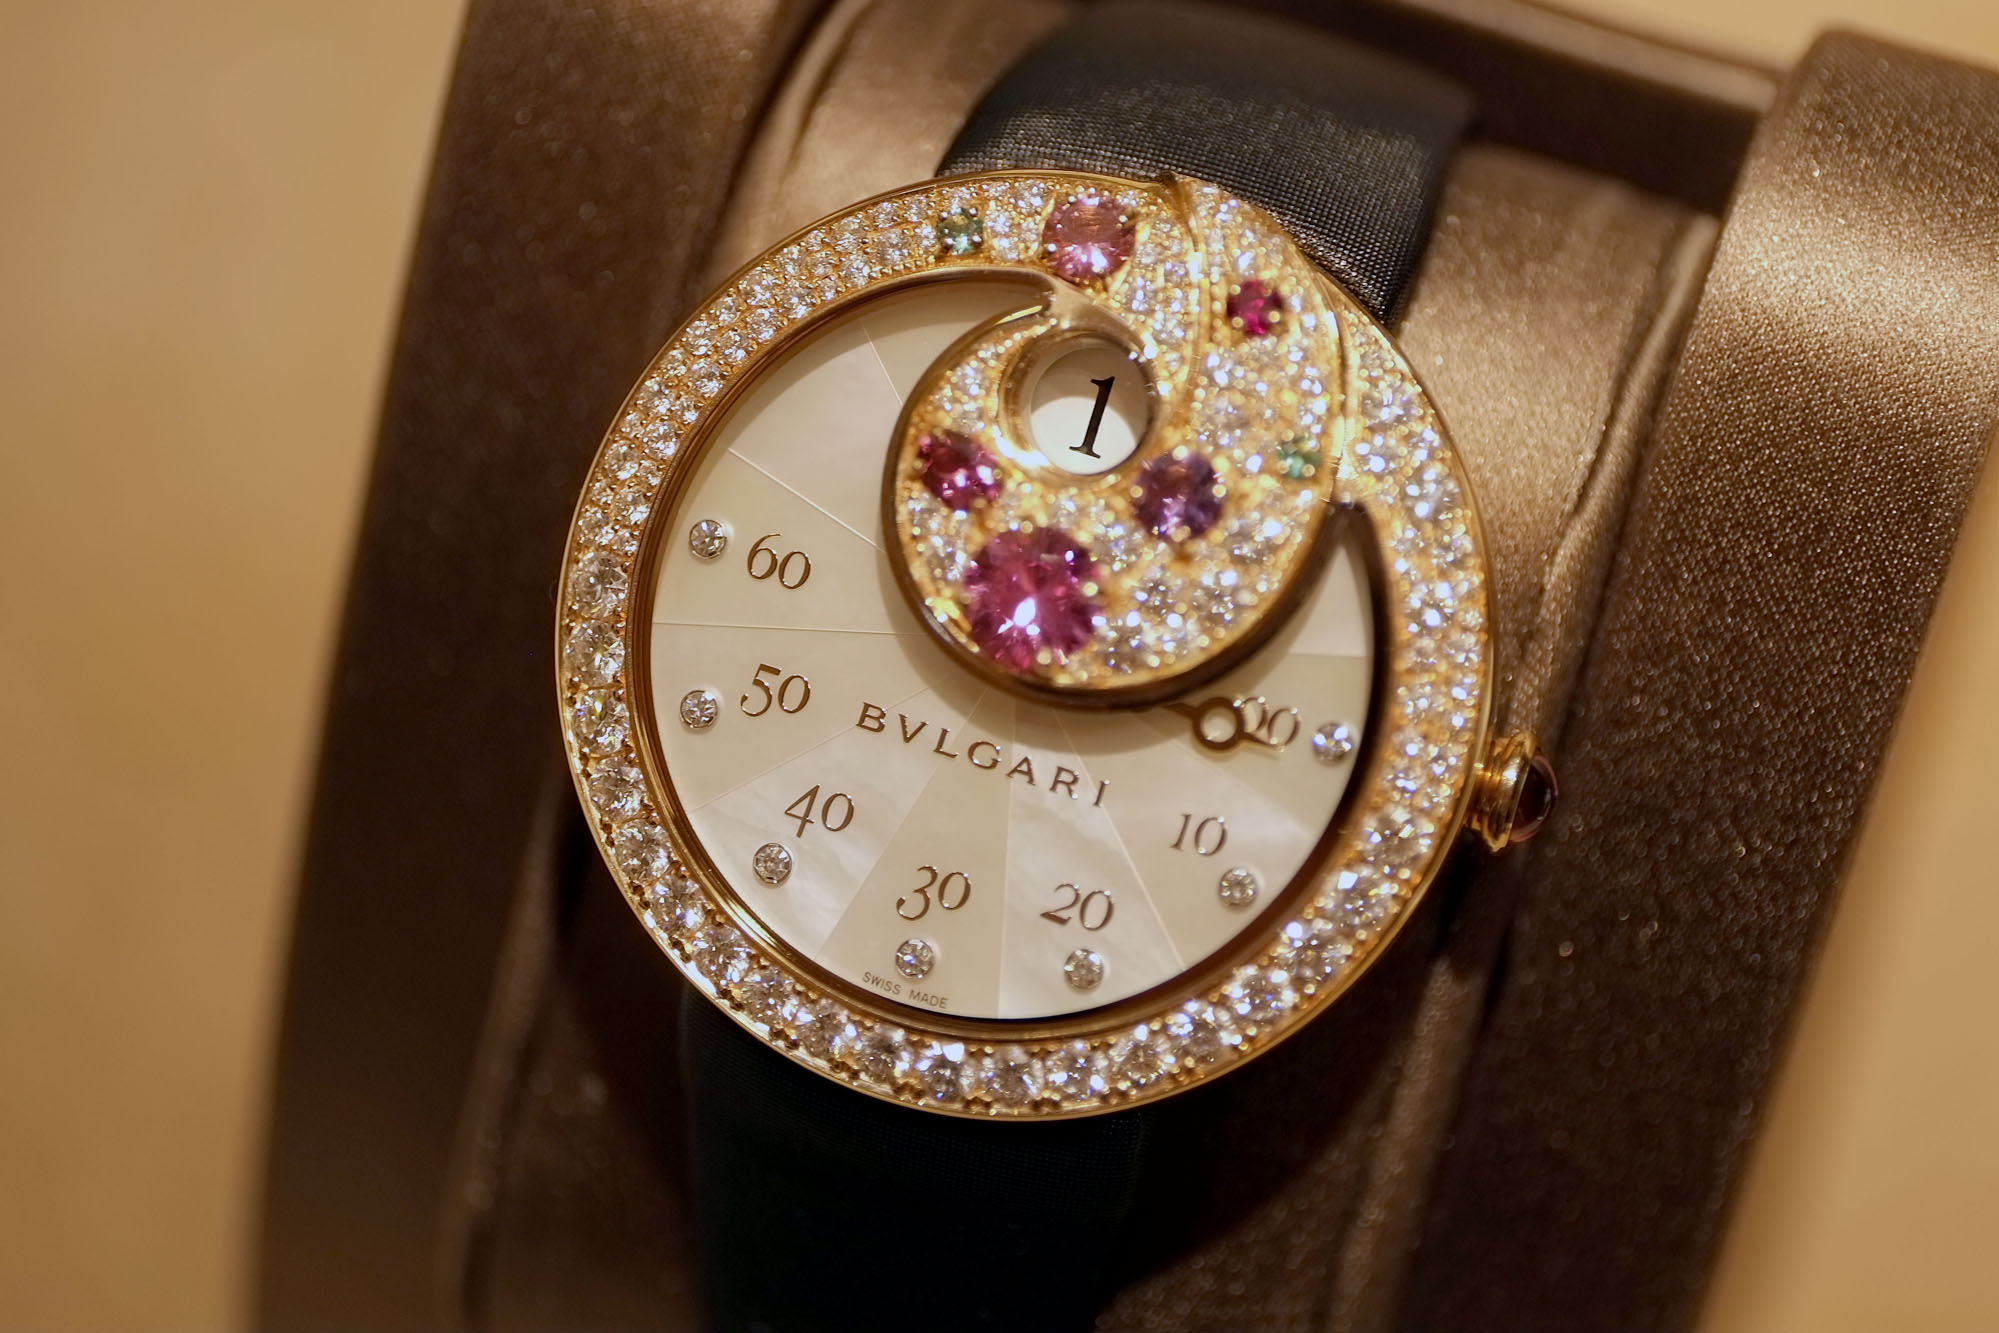 Designer: Bulgari's Italian-Made Watches Are on Par With Those From ...